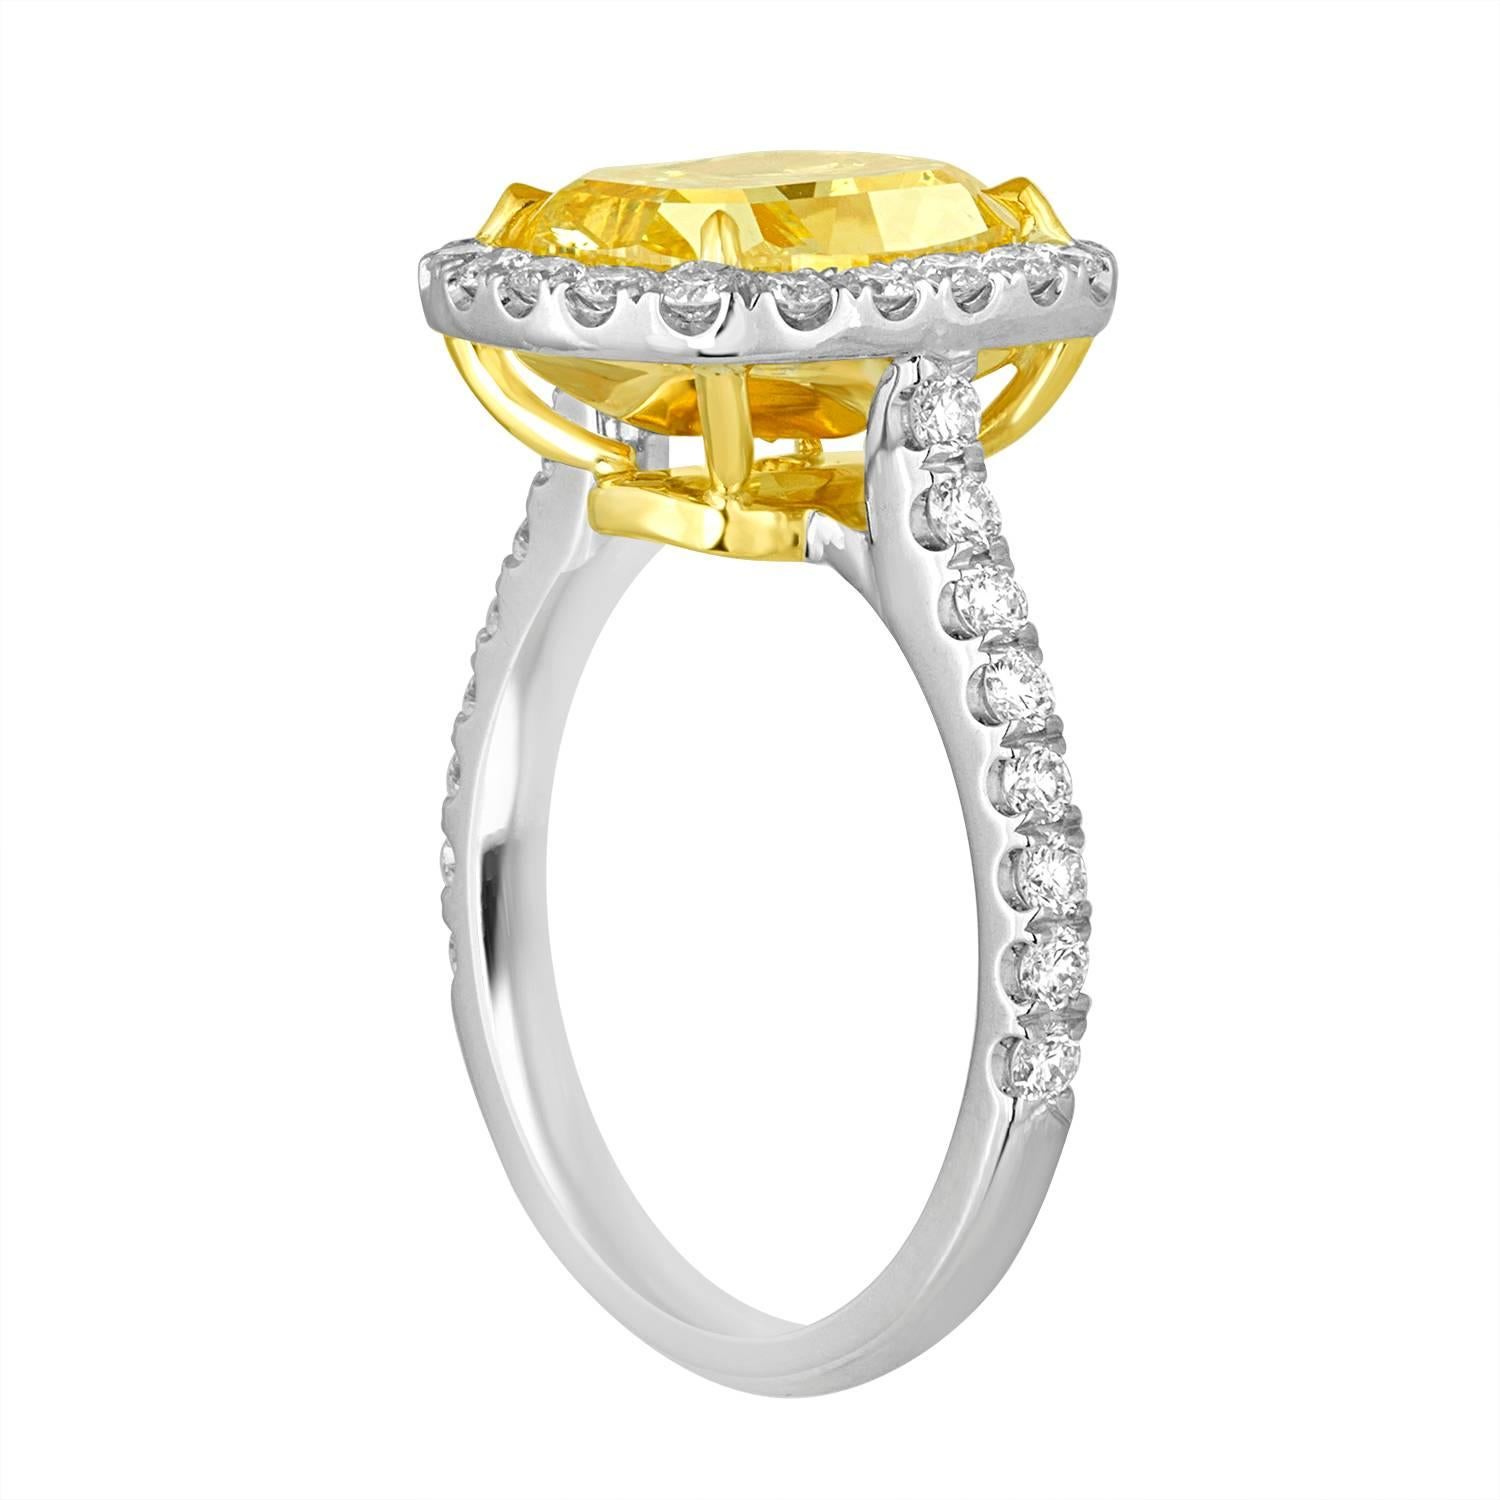 4.76 Carat Cushion Shaped Diamond is GIA certified as Fancy Vivid Yellow in Color and SI2 in Clarity. The Diamond is full of life and beauty. The Cushion is set in Two Tone Mounting with 70 Brilliant 1.54 Carat Total Weight in Halo settings. White